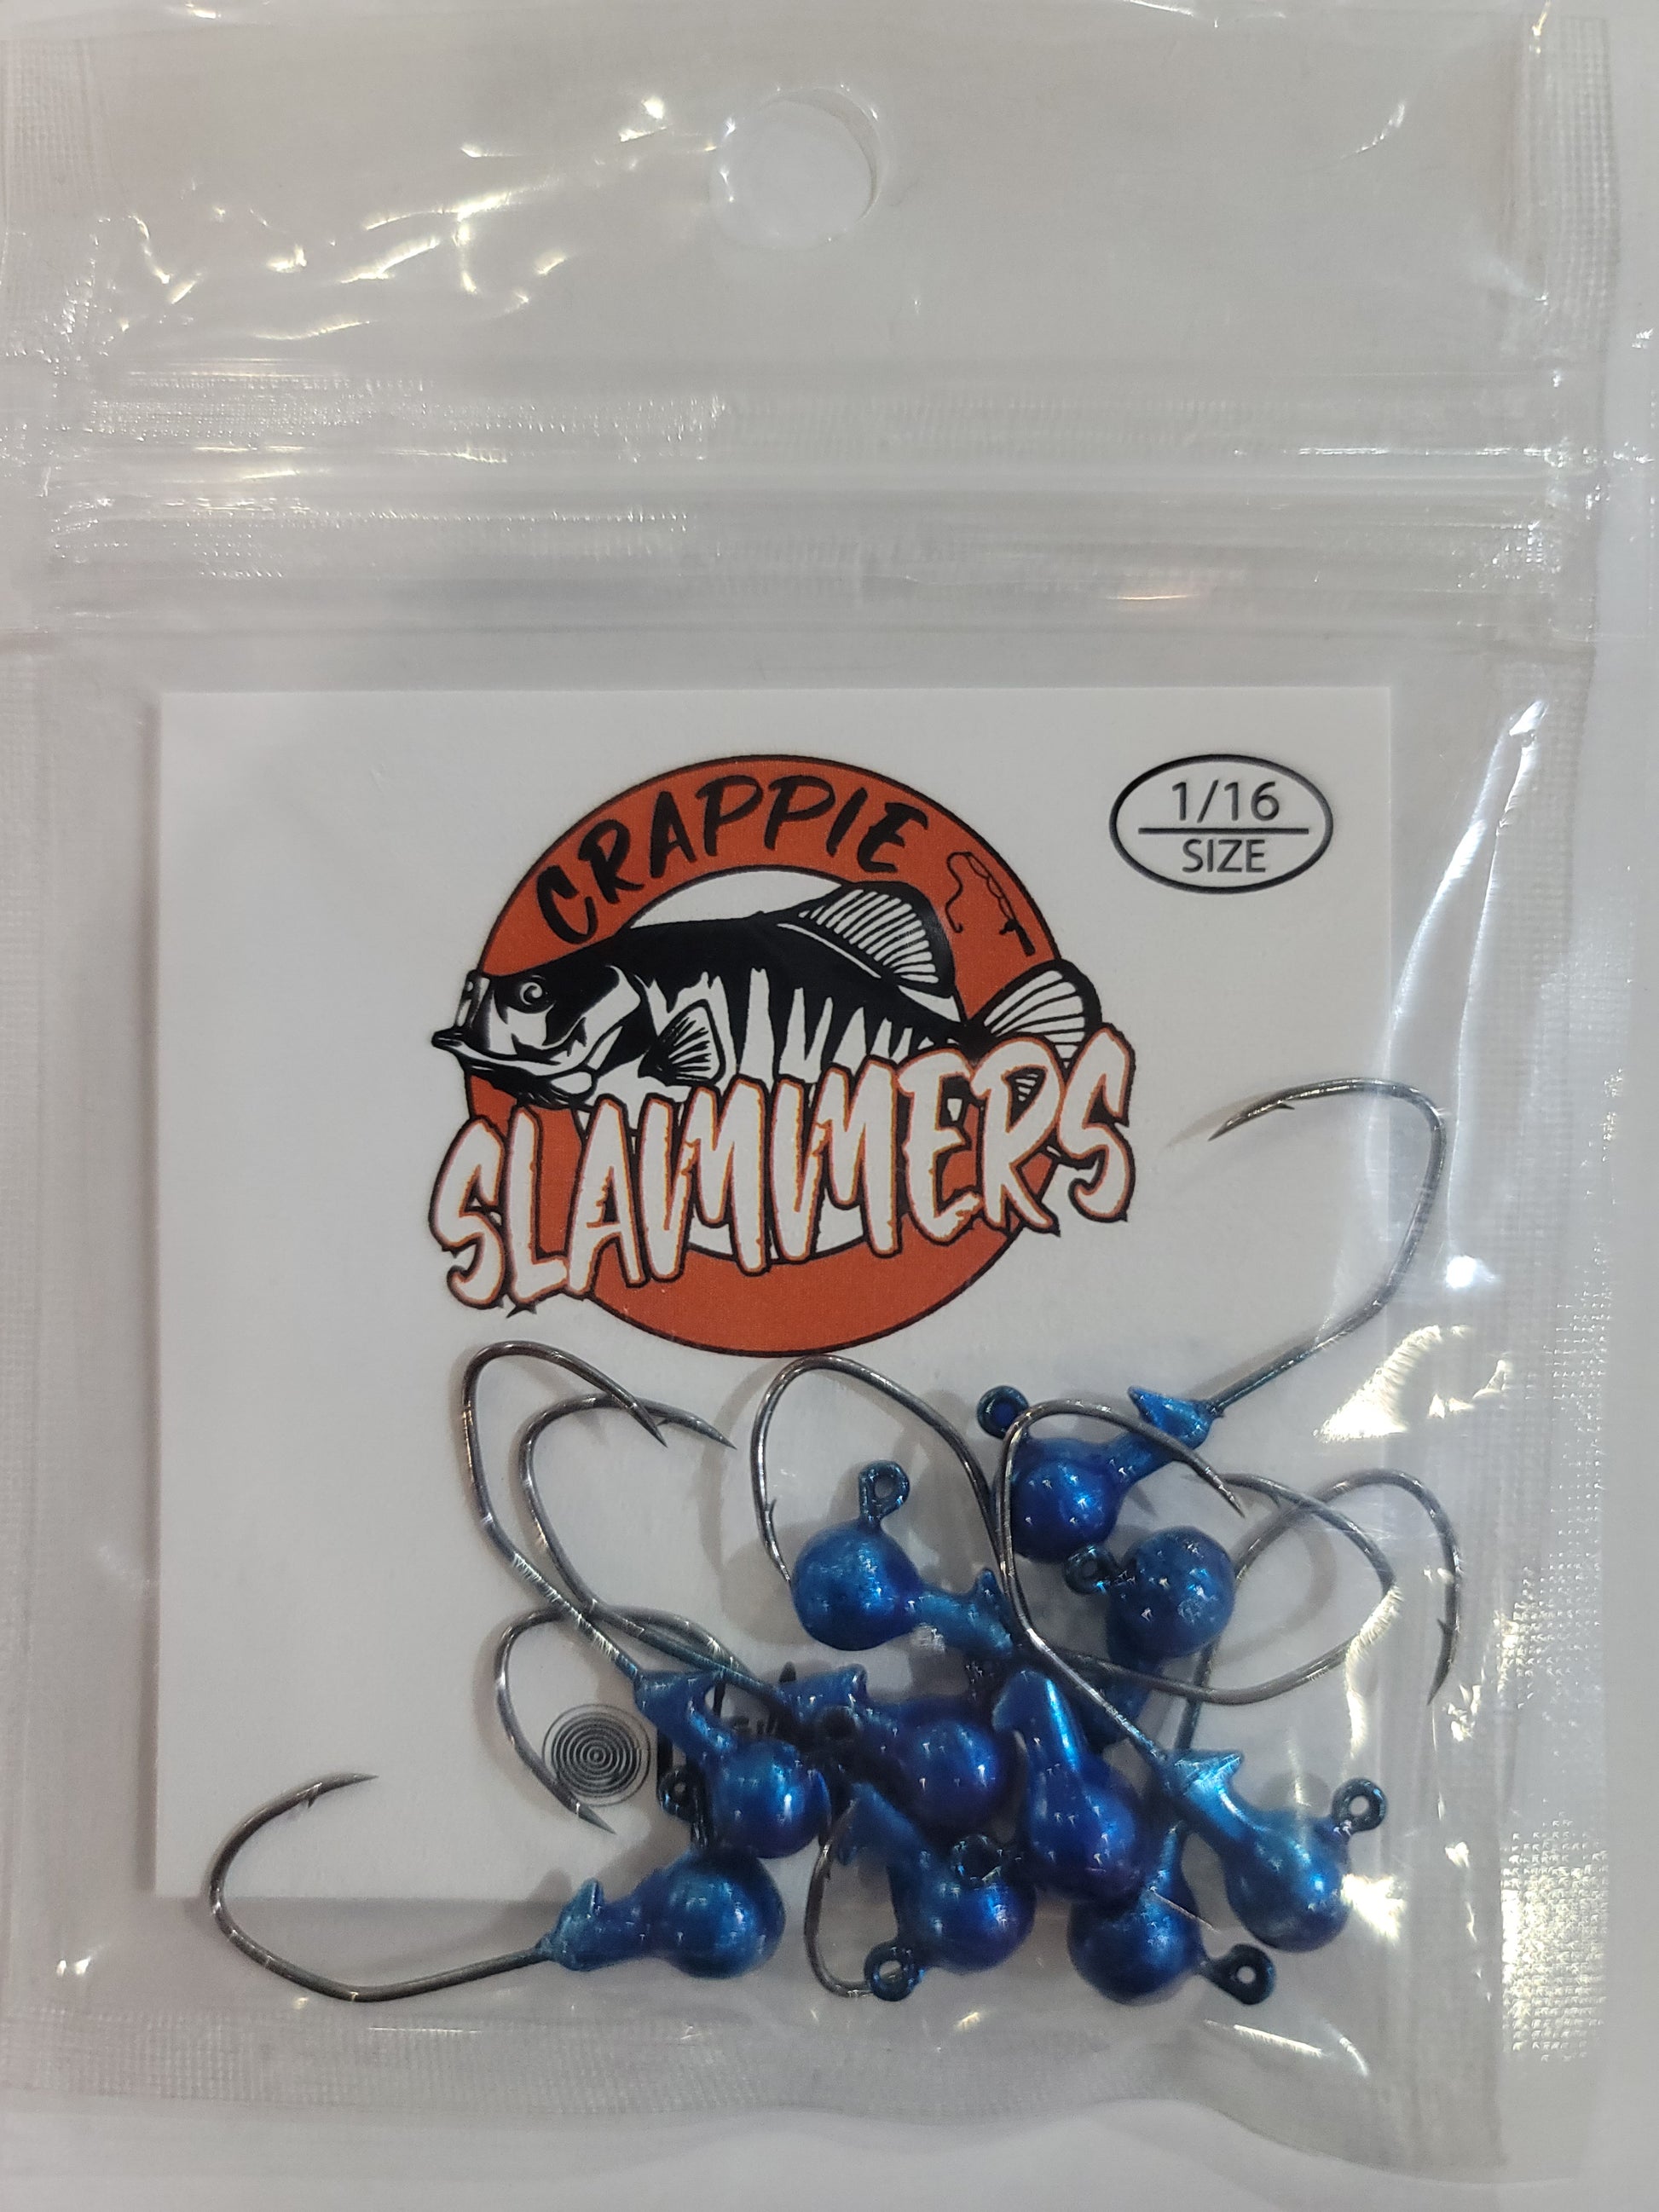 1/16oz Jig Heads - Candy Blue – Crappie Slammers